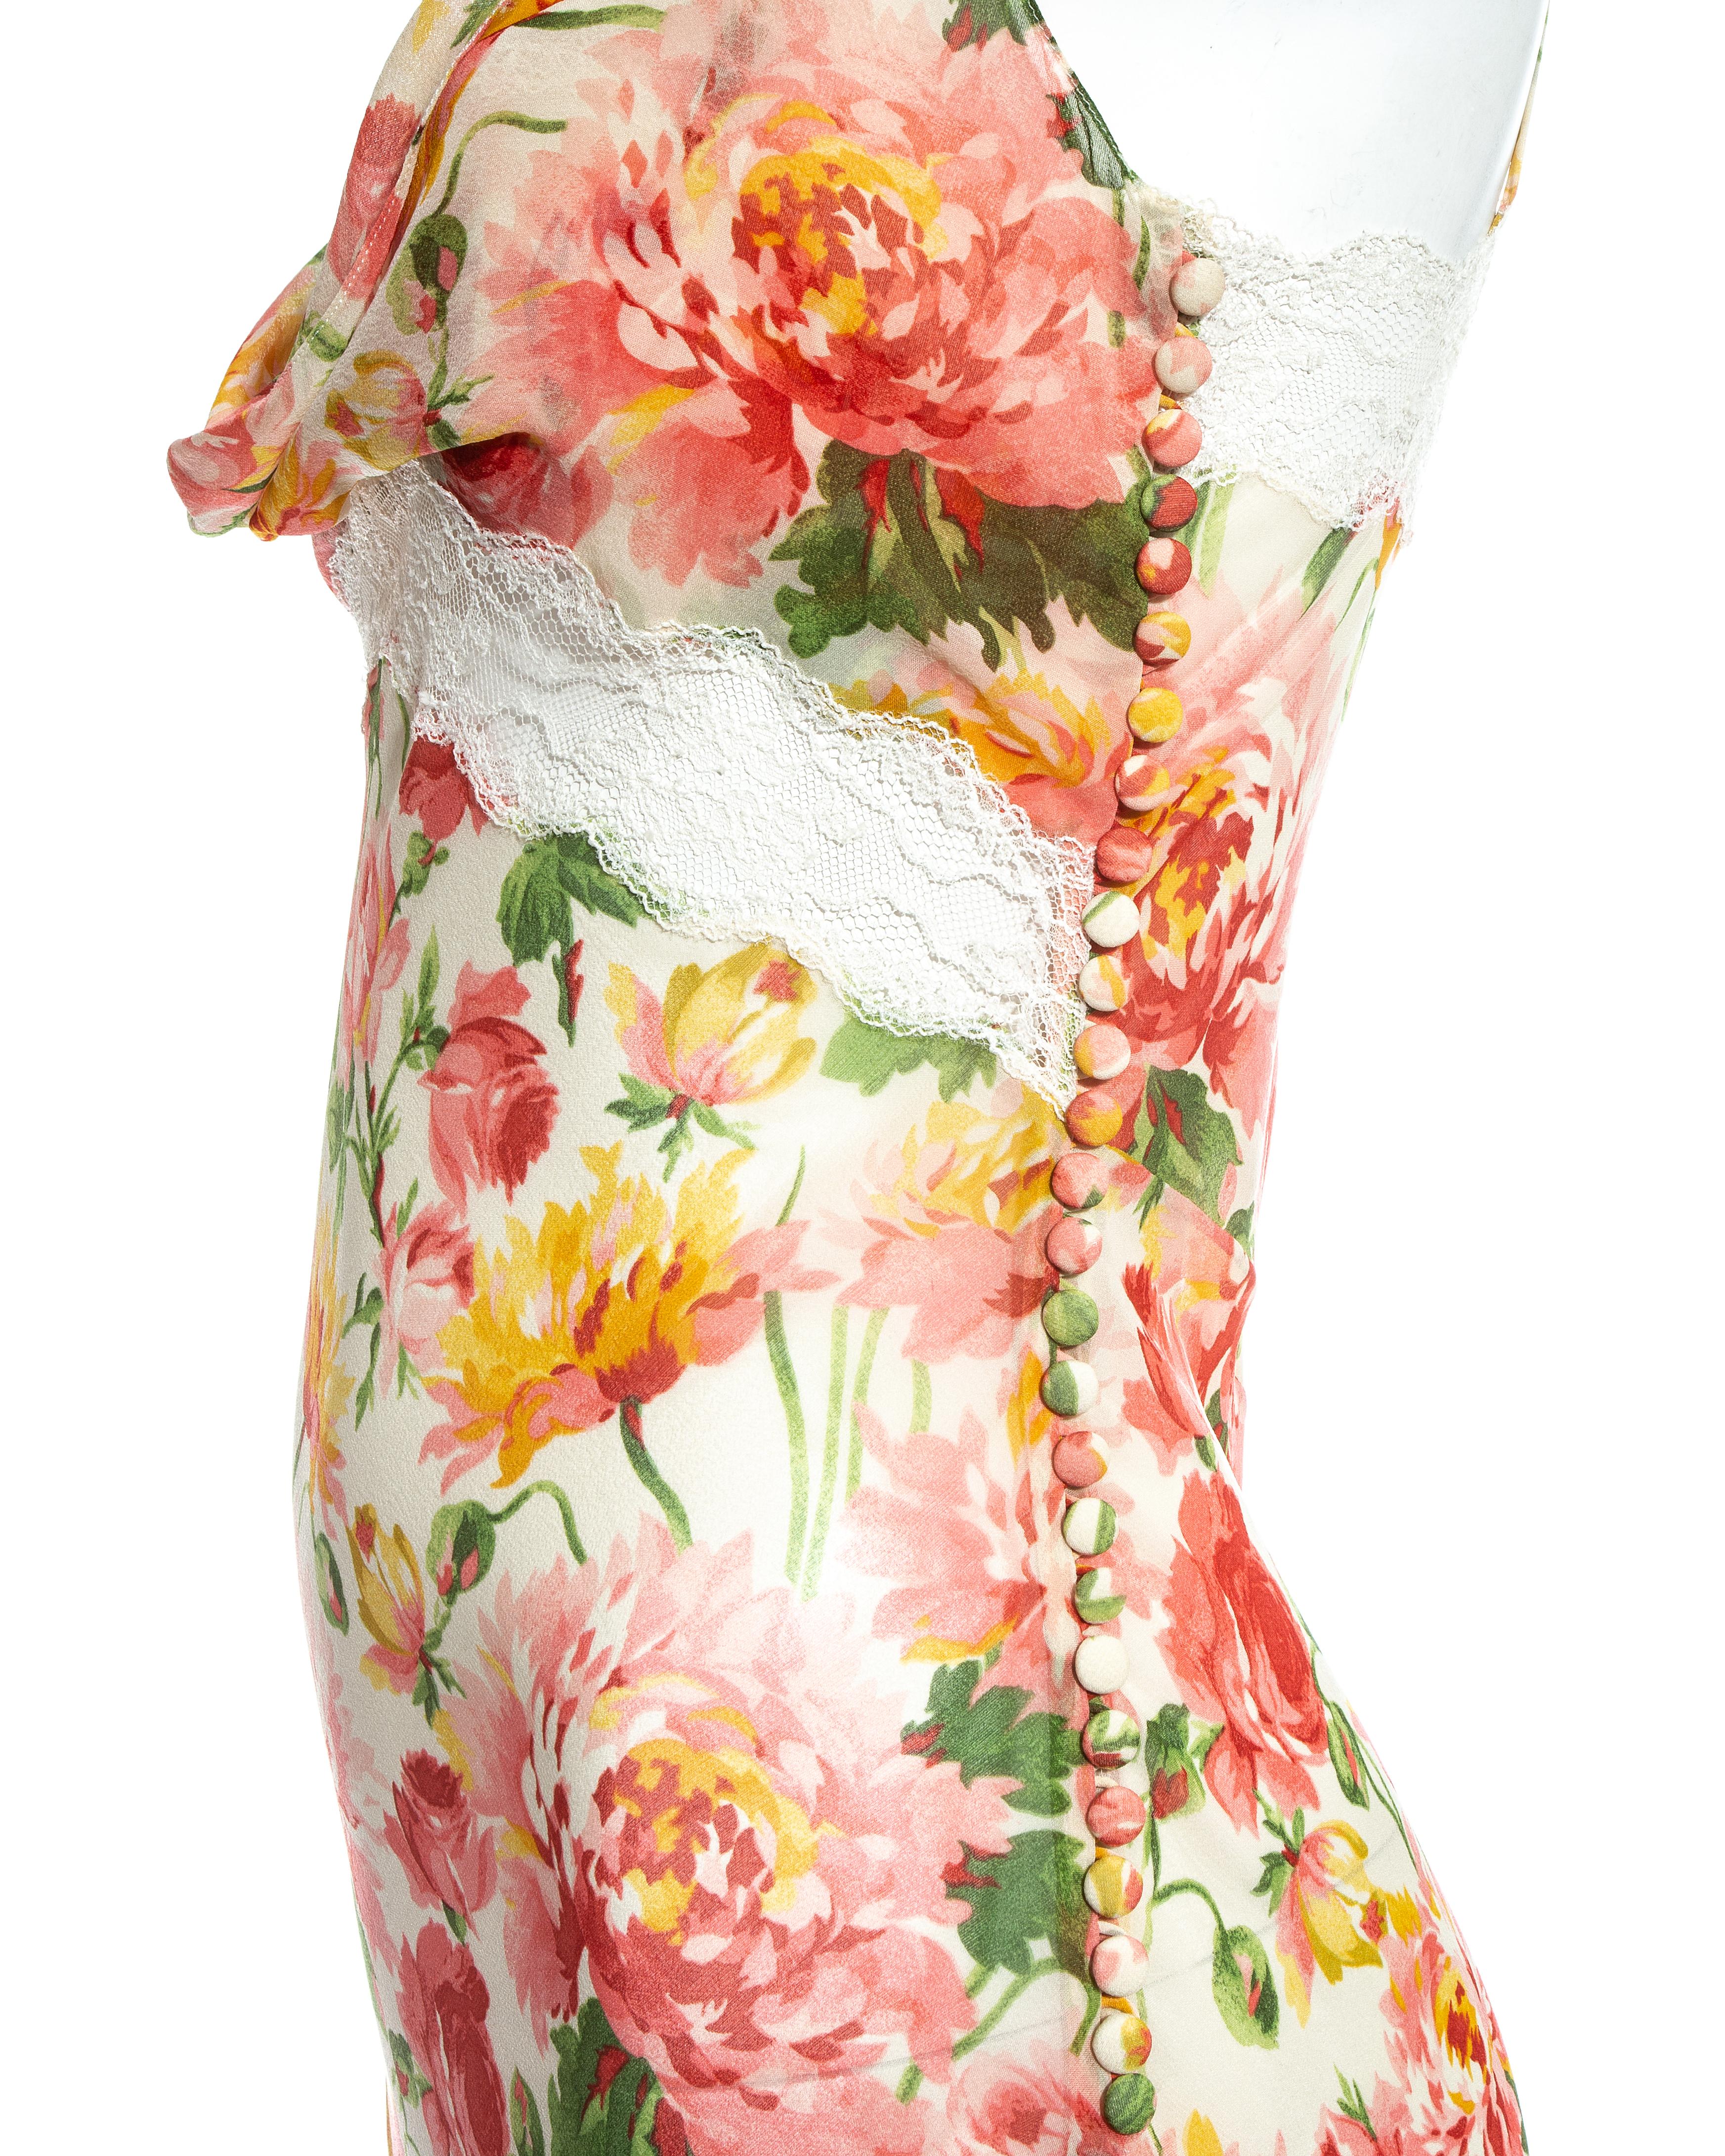 Women's Christian Dior by John Galliano floral silk chiffon and lace dress, ss 2005